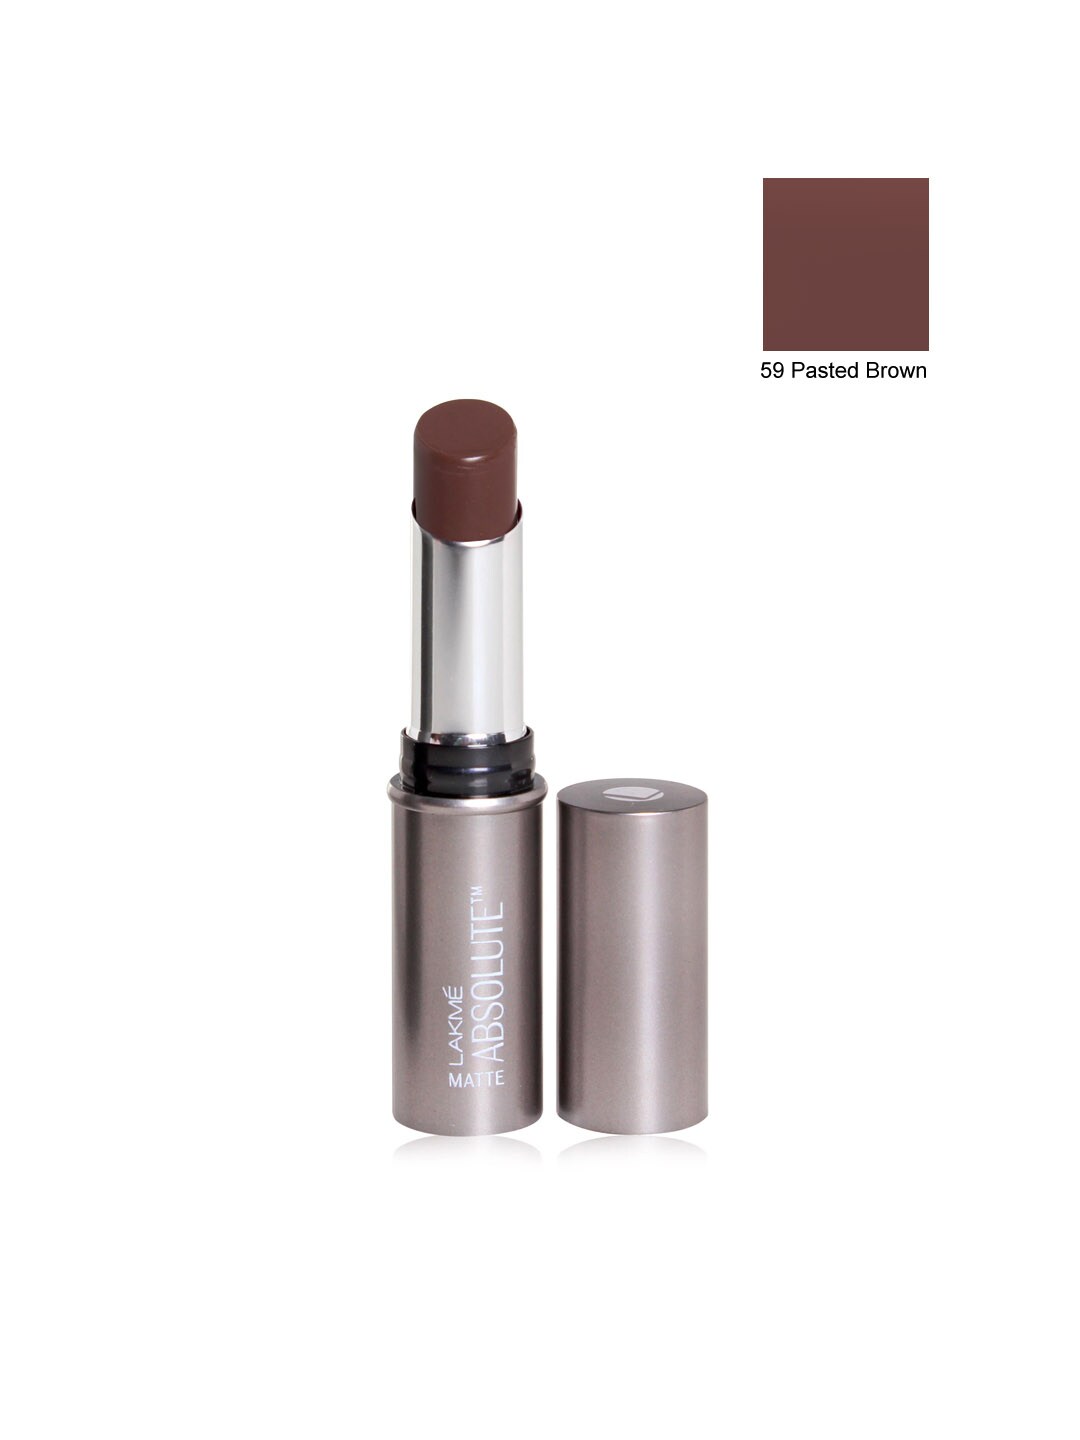 Lakme Absolute Matte Toasted Brown Lipstick 59